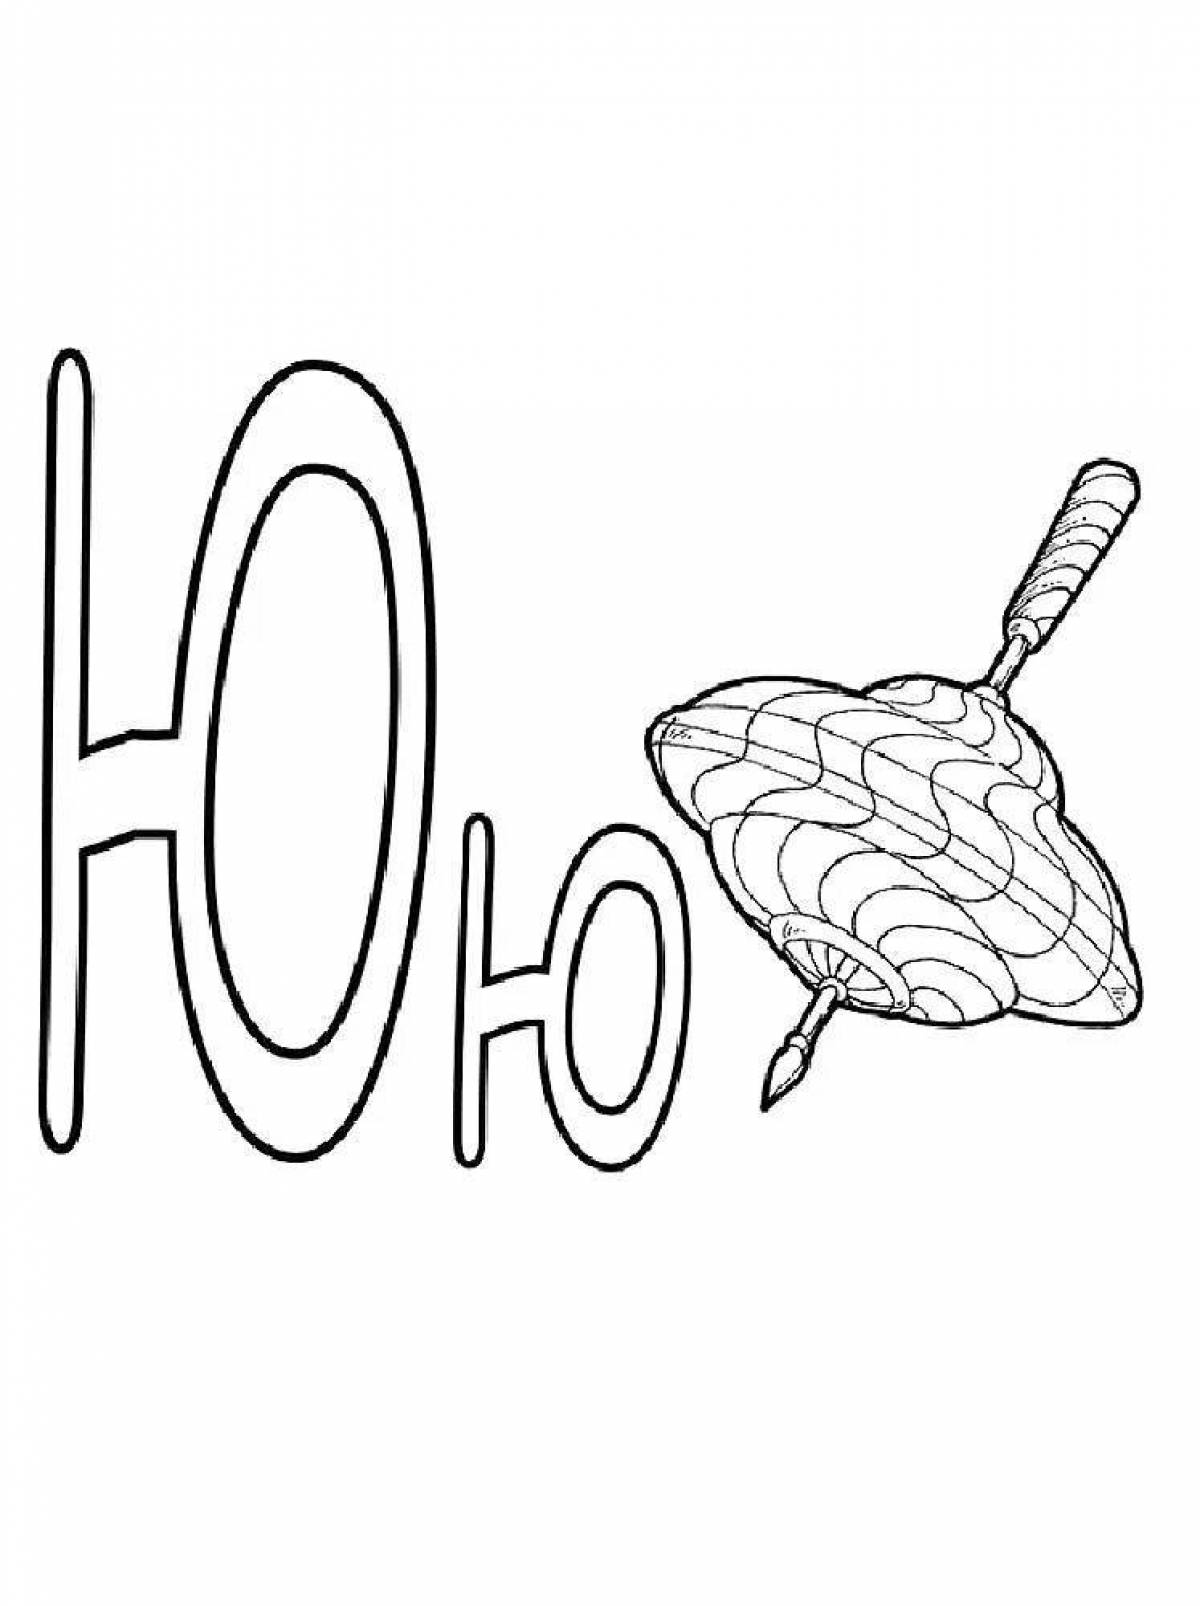 Amazing letter u coloring page